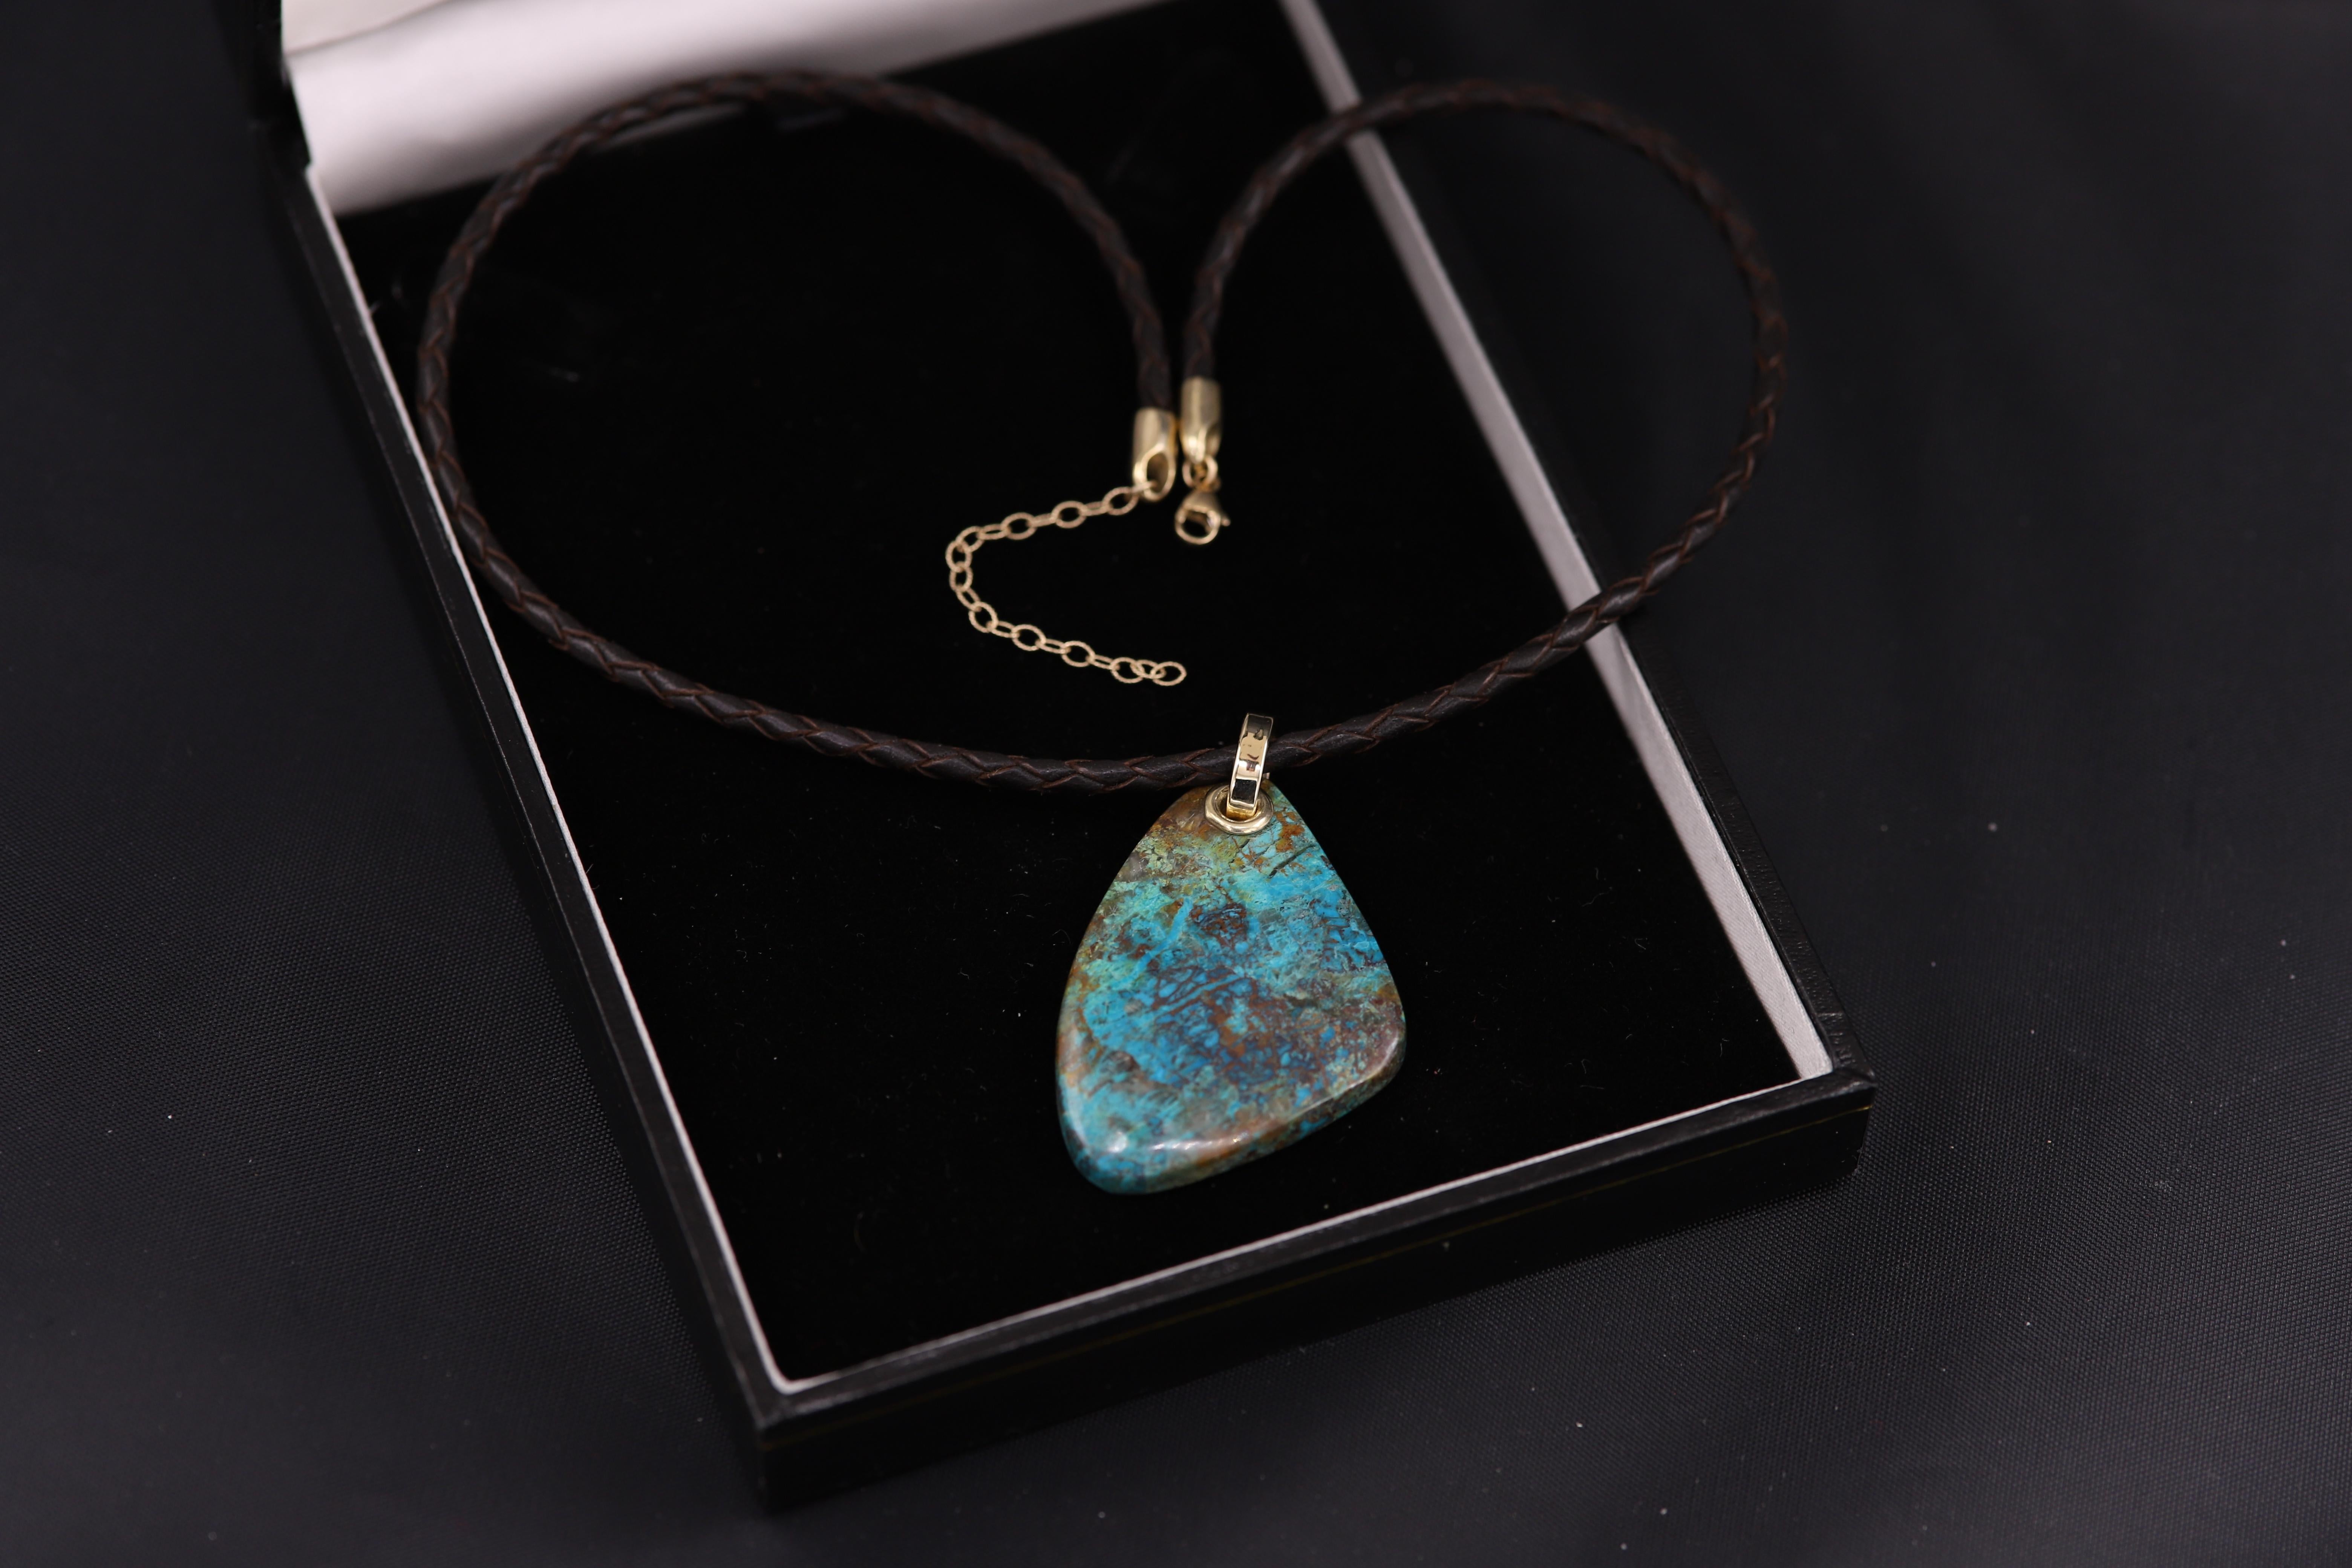 Chrysocolla Natural Stone Necklace 14 Karat Yellow Gold Leather & Blue Stone For Sale 1